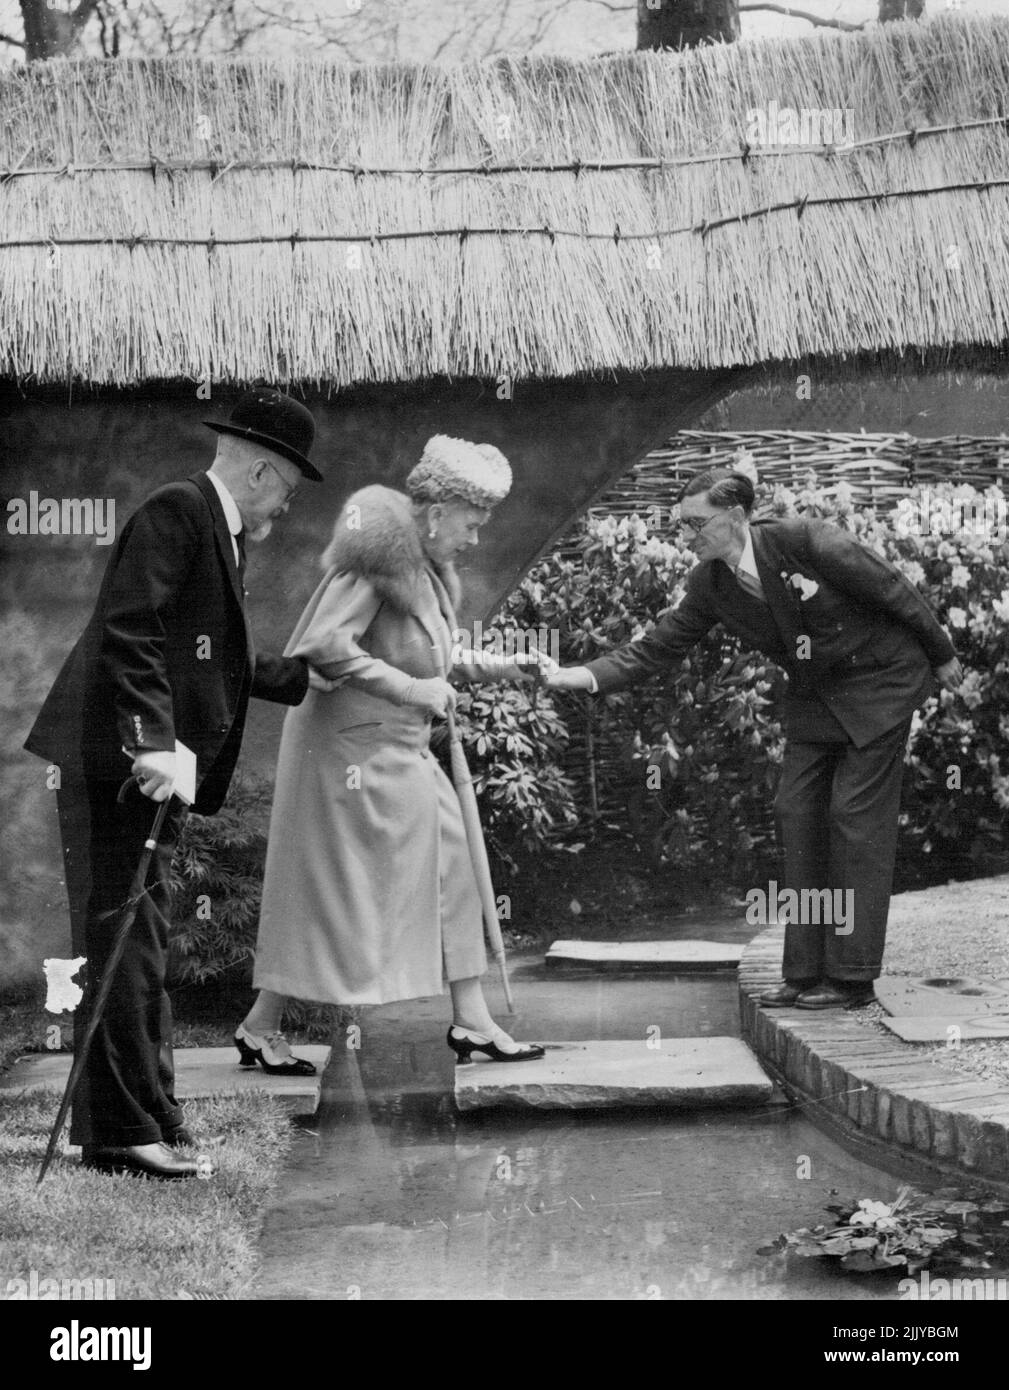 Queen Mary On The Stepping Stones -- Queen Mary, who will be 83 next Friday, crossing the stepping stones in the thatched walled garden when she toured the Chelsea Flower Show at the Royal Hospital, Chelsea, London today (Tuesday). Today was private view day; the show opens to the public tomorrow. May 23, 1950. (Photo by Reuterphoto). Stock Photo